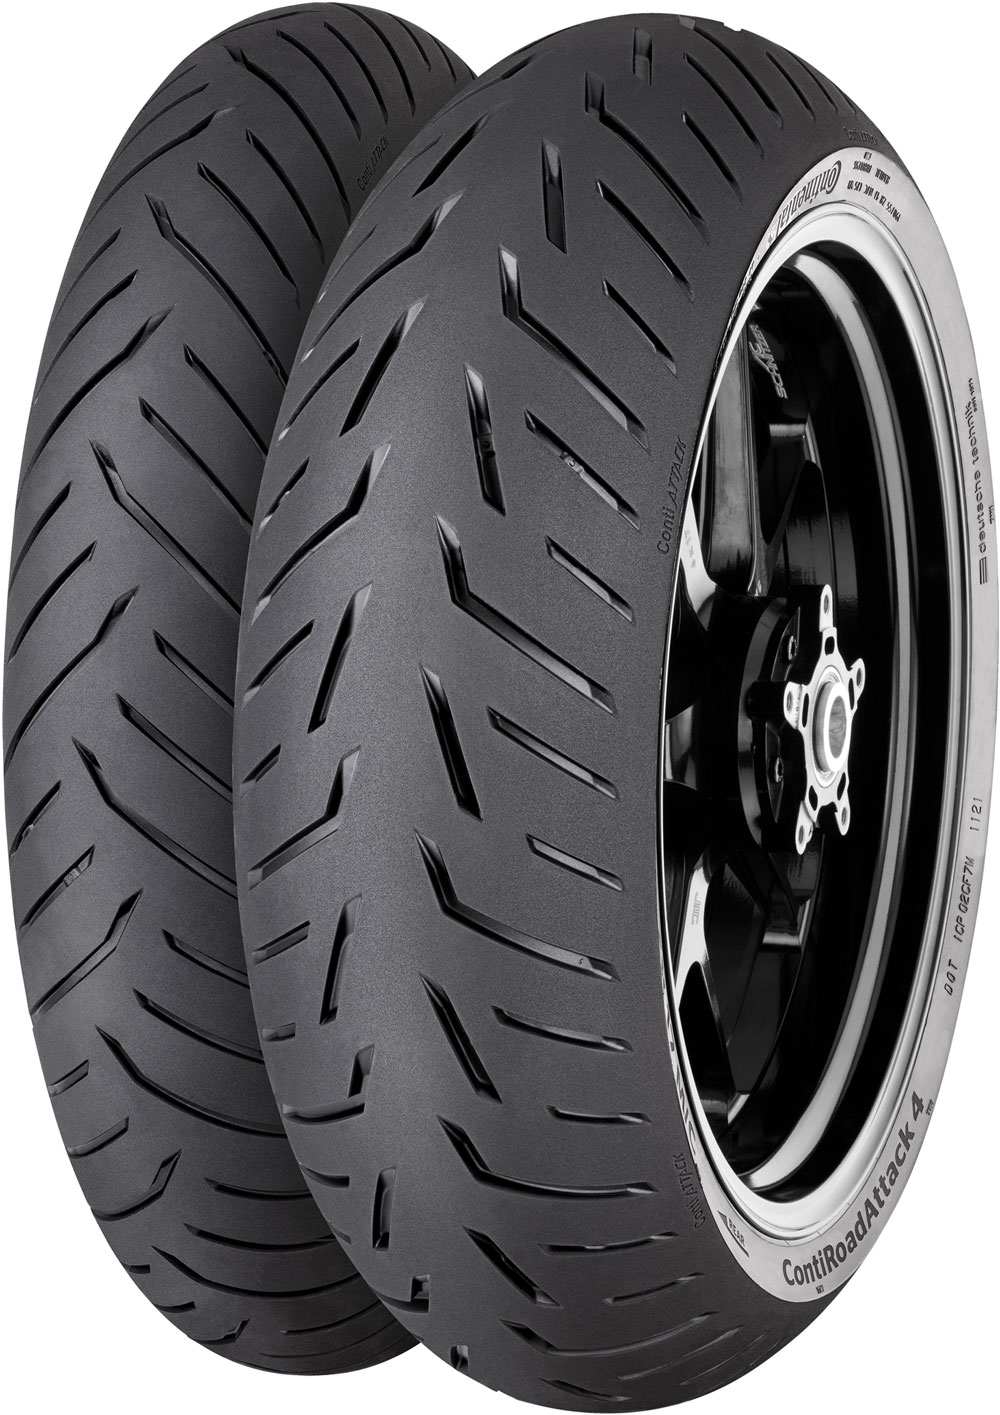 product_type-moto_tires CONTINENTAL RDATTACK4 110/80 R19 59V